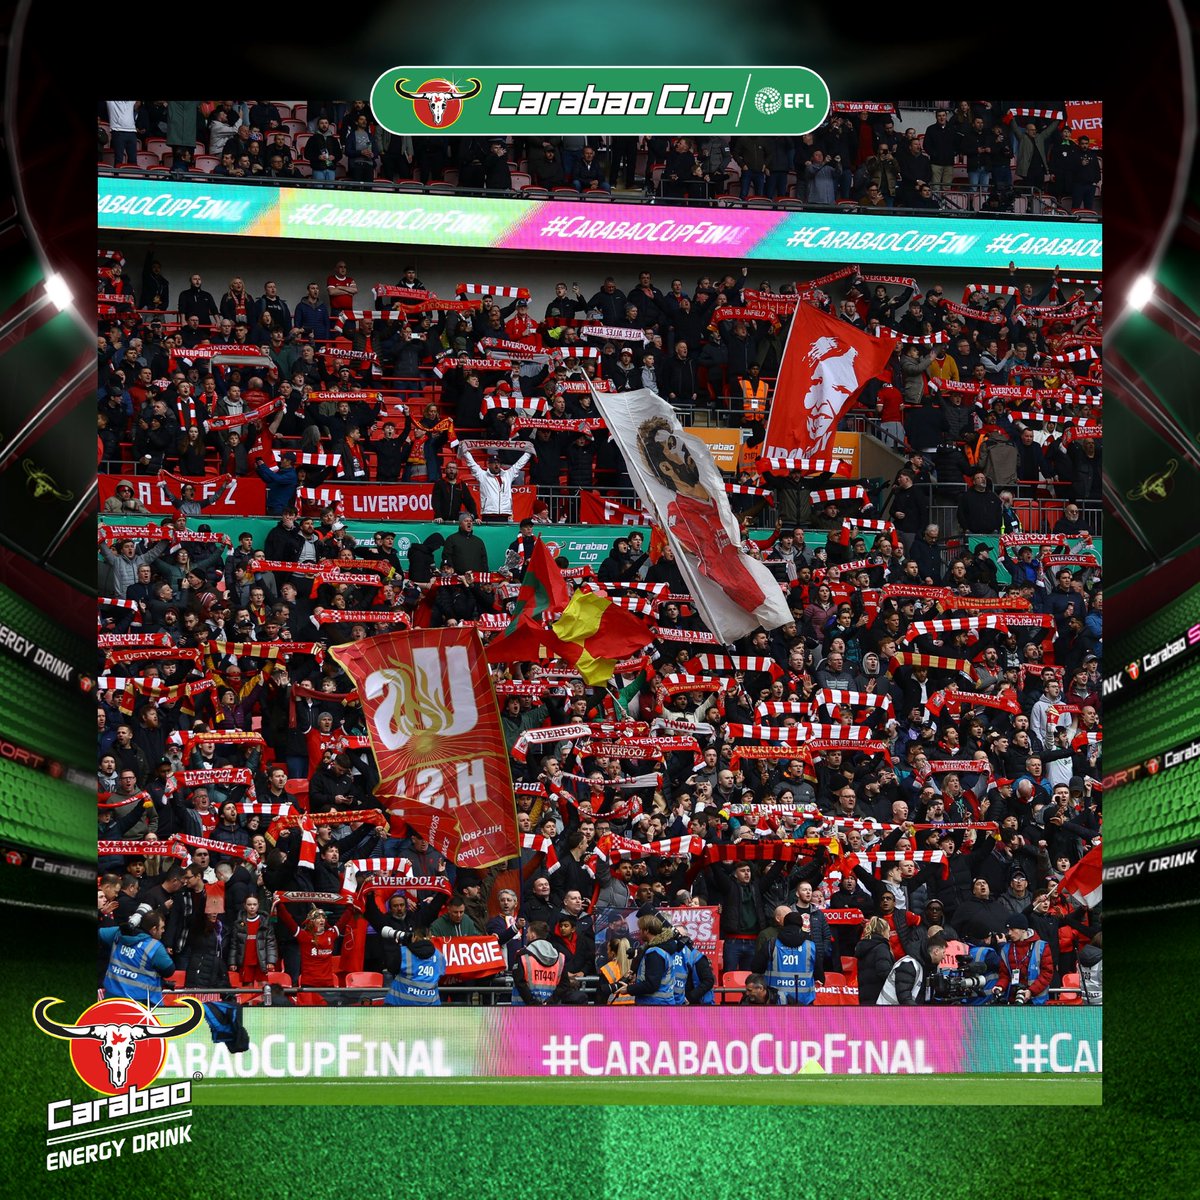 The ribbons are red🔴🏆 #CarabaoCupFinal